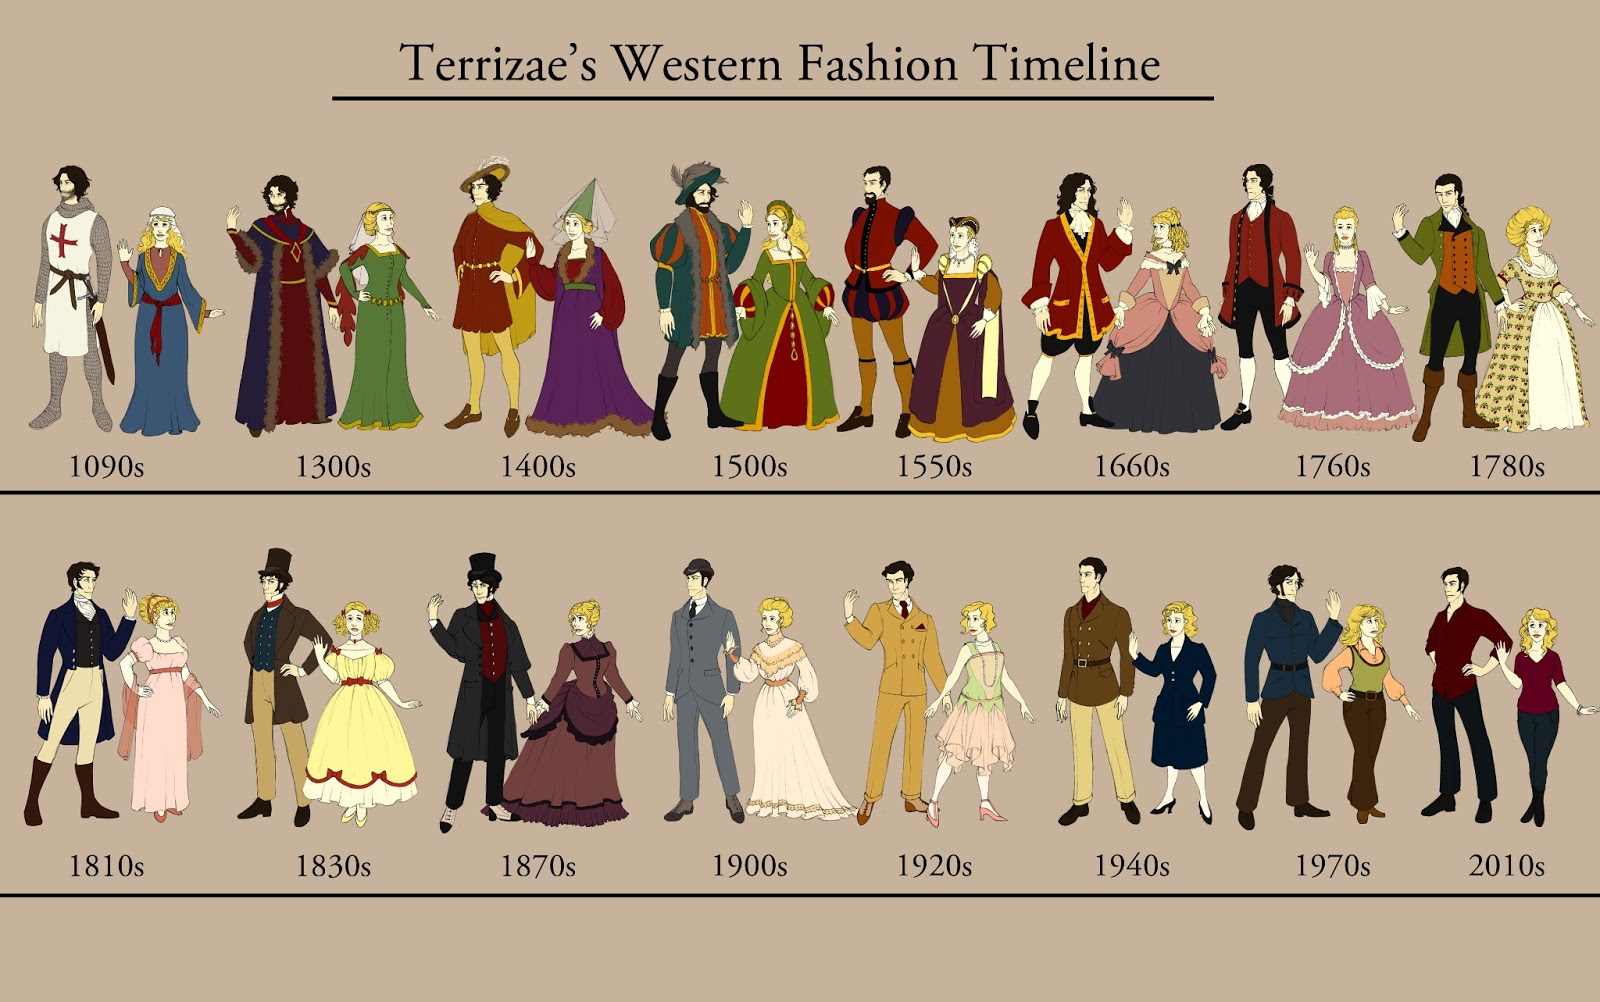 Sherlock Holmes Shapes of Women's Fashion Over the Years